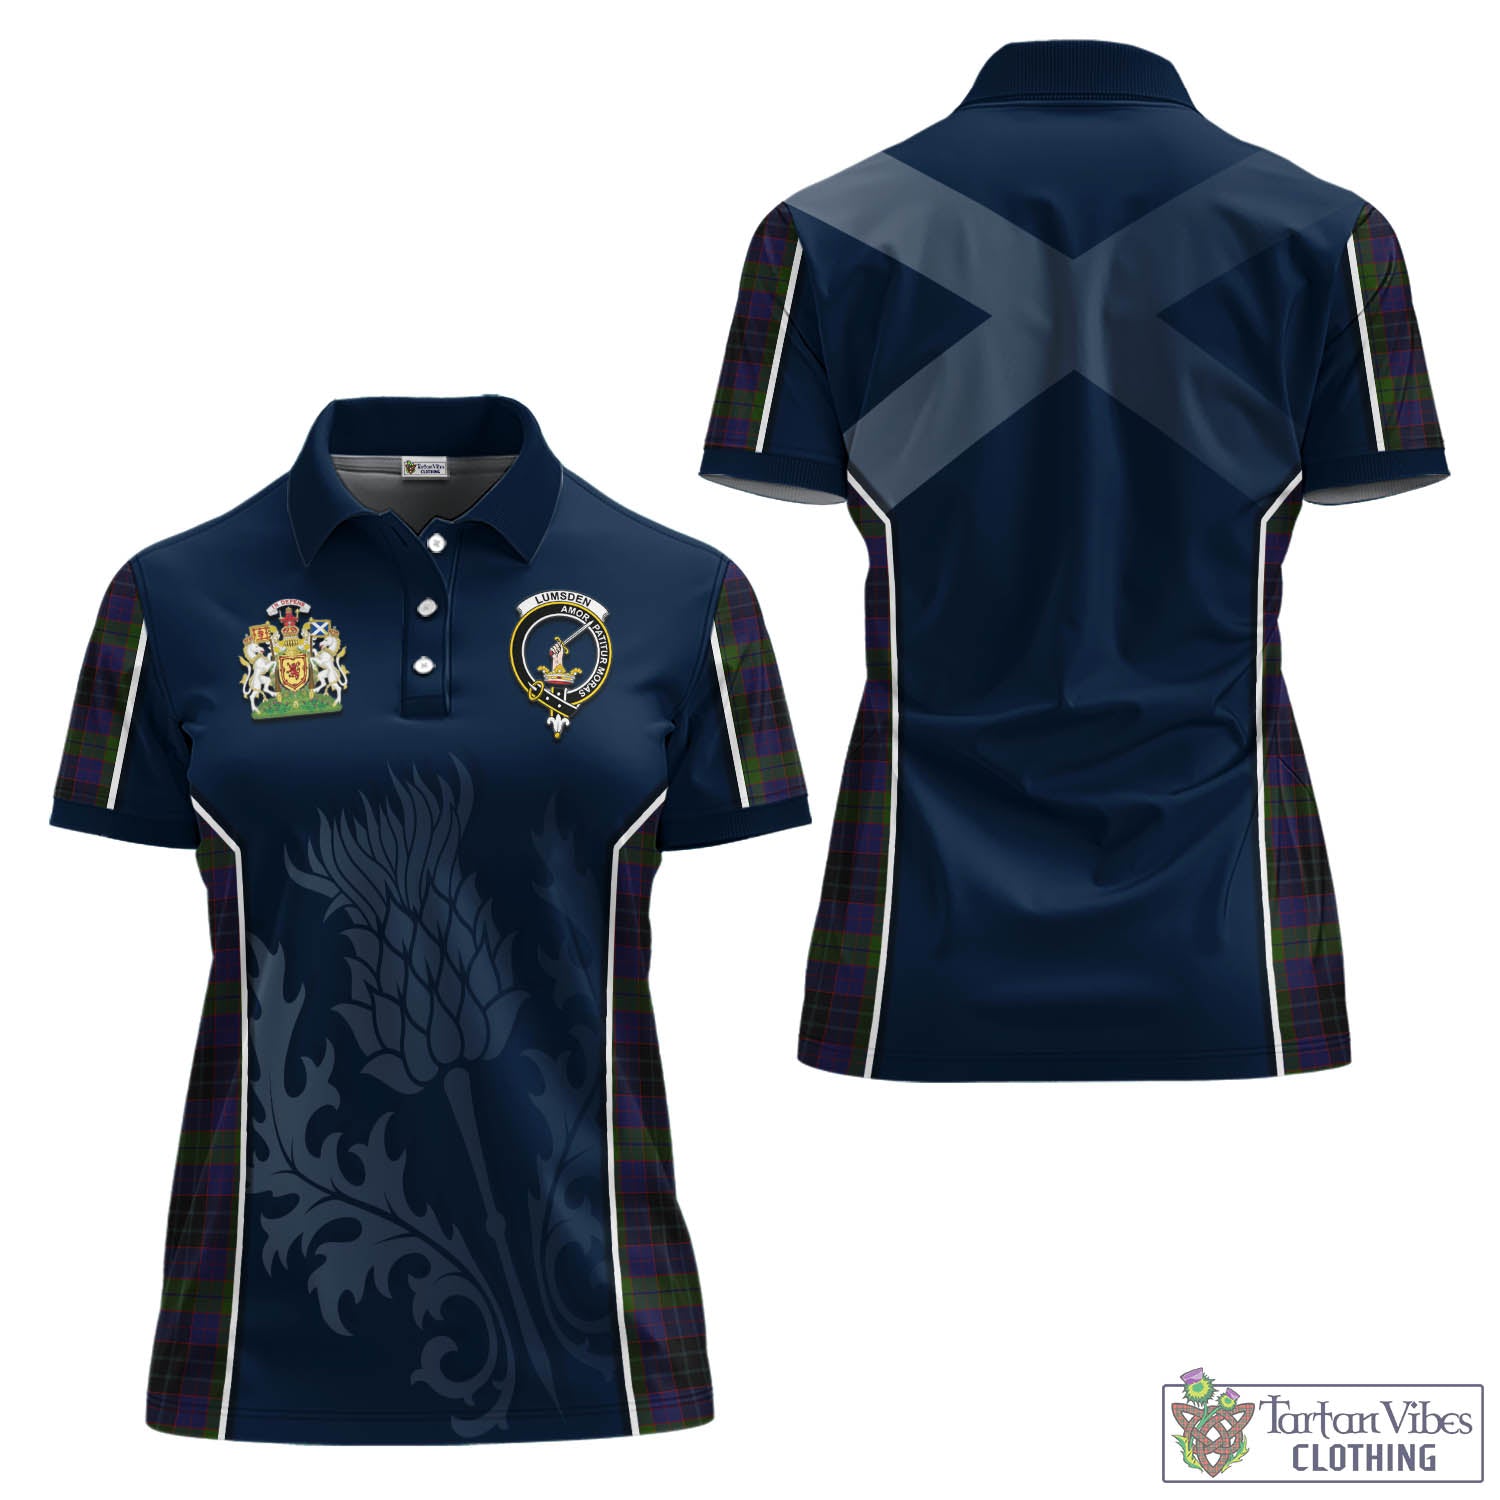 Tartan Vibes Clothing Lumsden Hunting Tartan Women's Polo Shirt with Family Crest and Scottish Thistle Vibes Sport Style